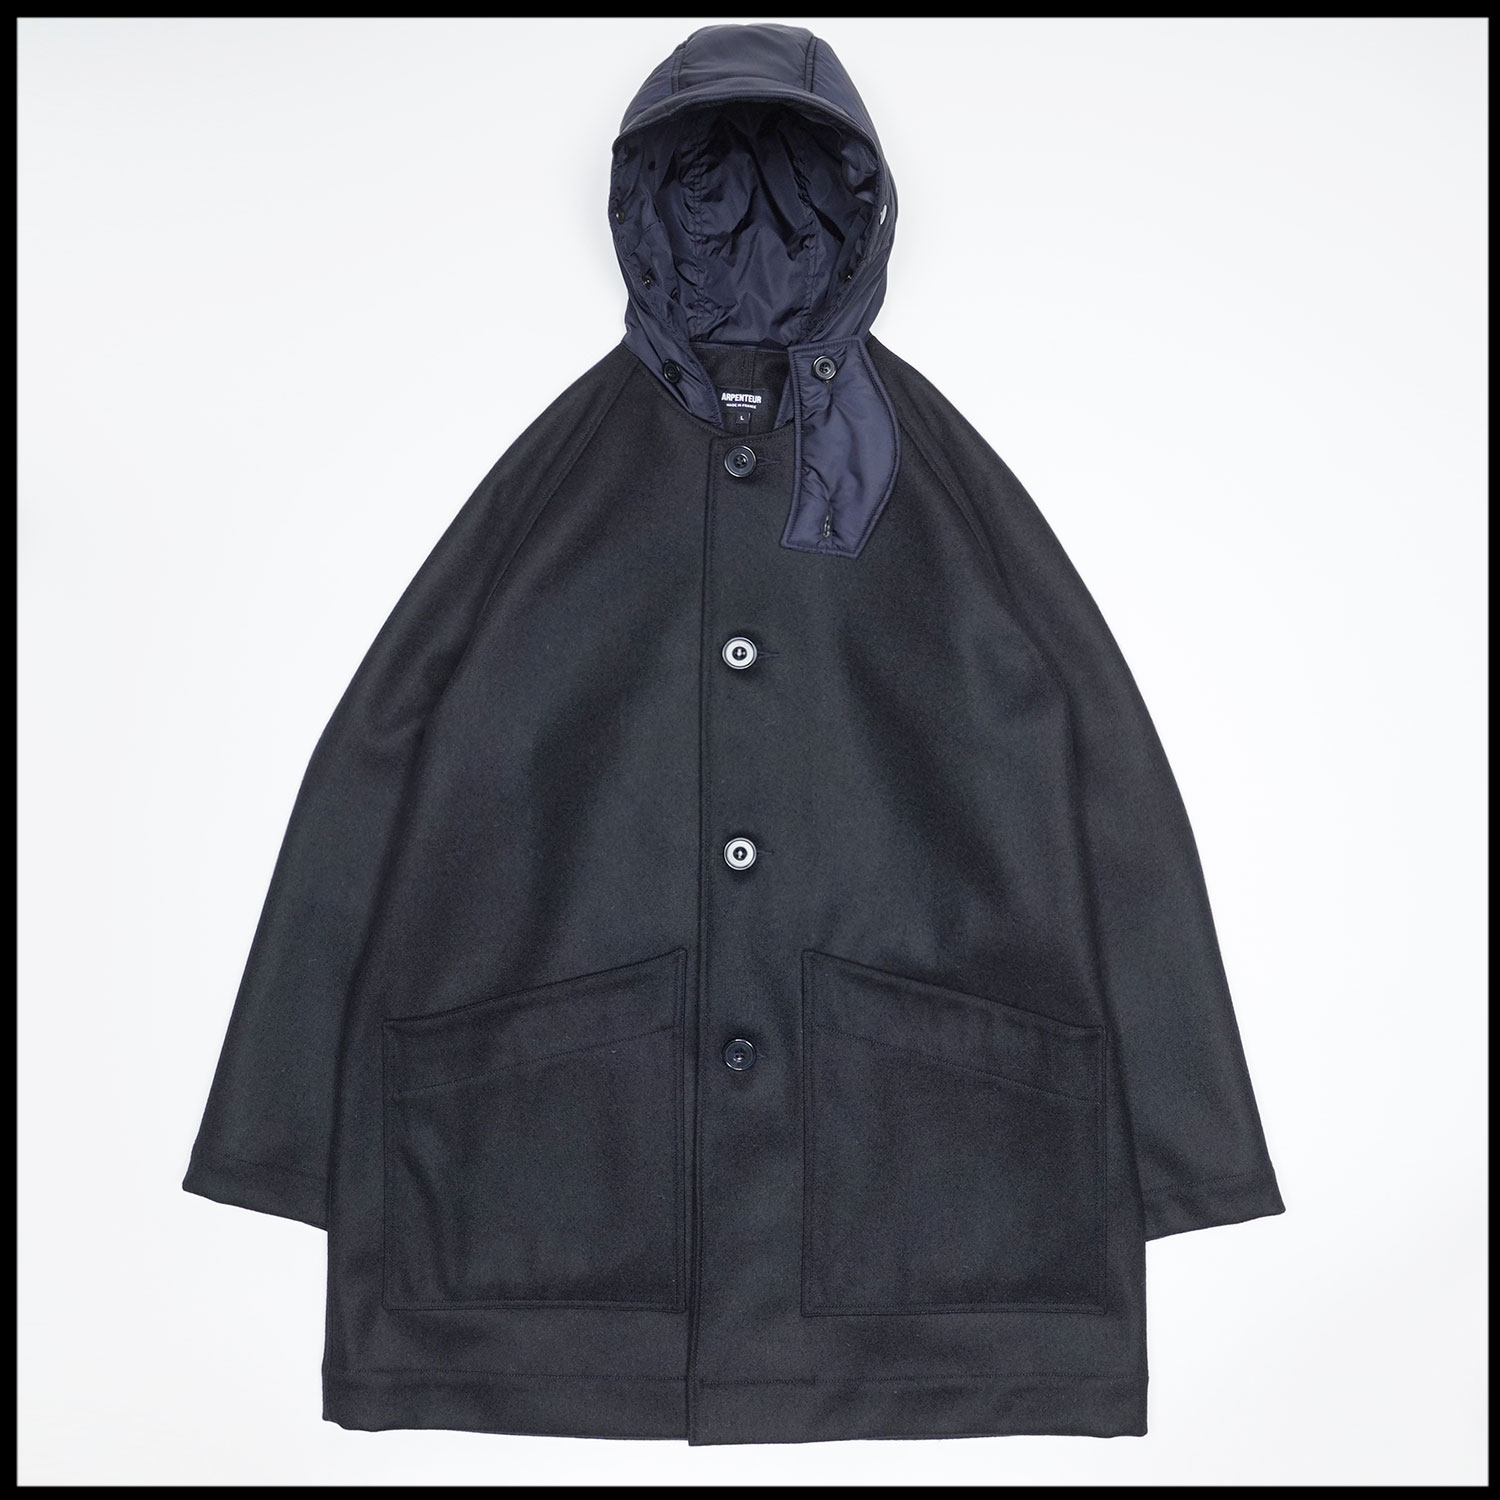 MEVI coat in Midnight blue color by Arpenteur